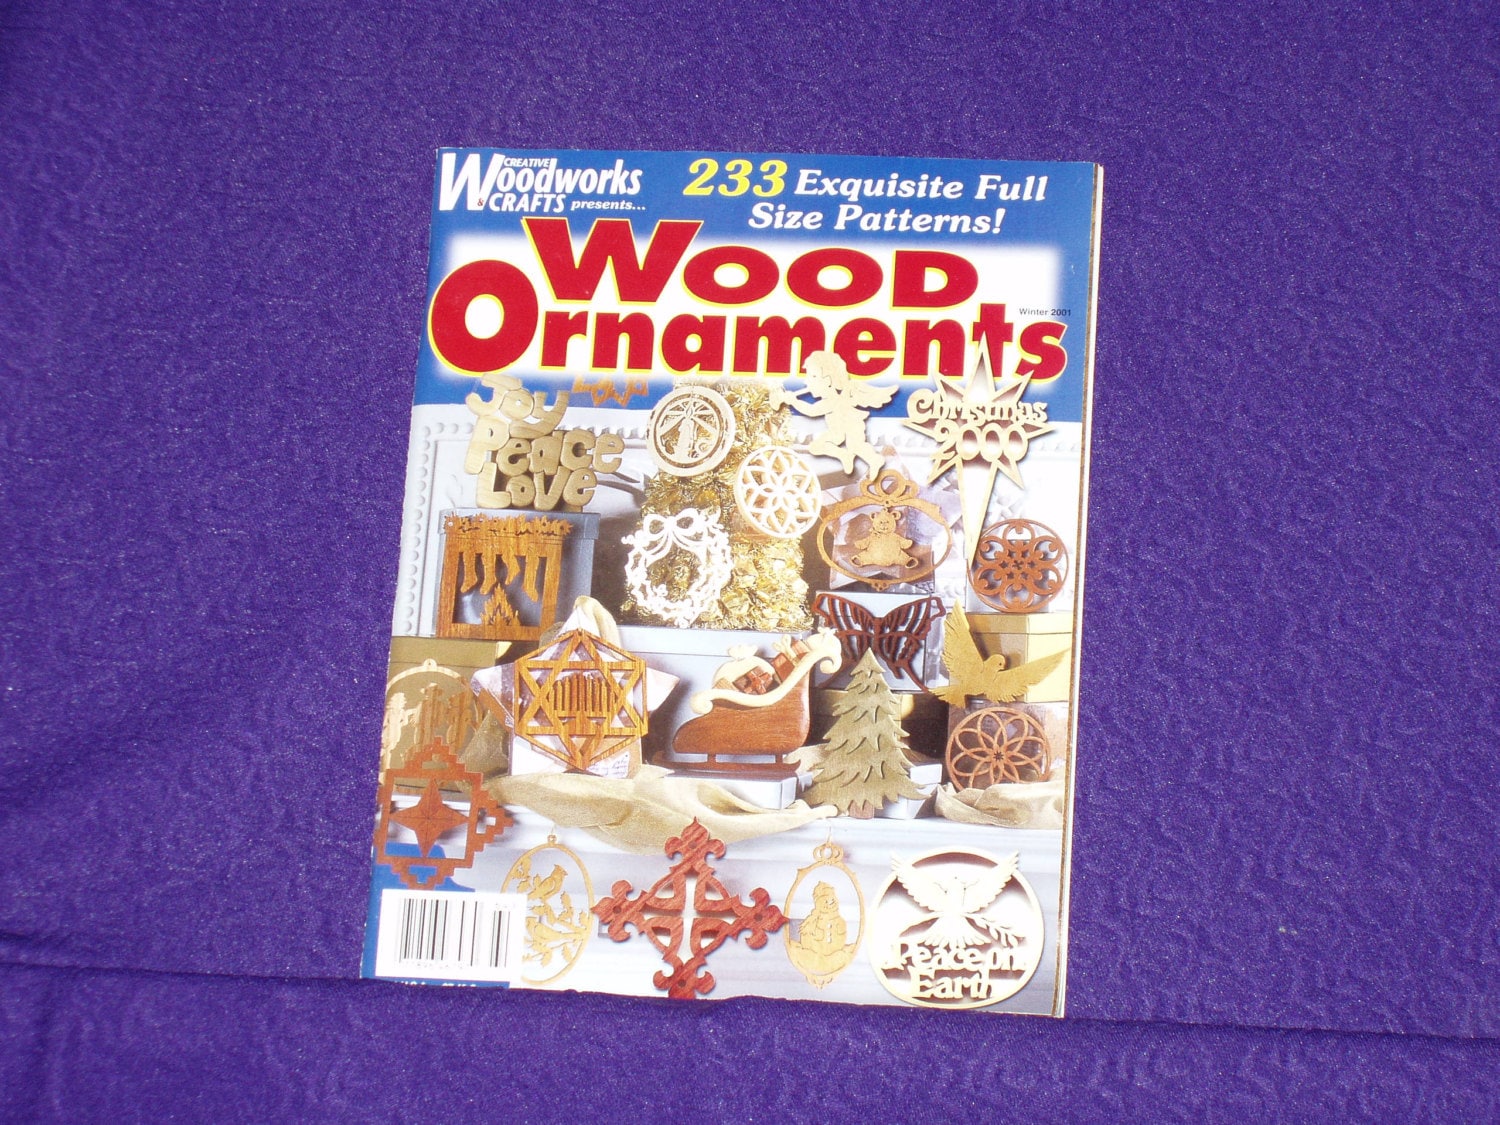 Creative Woodworks Crafts presents Wood Ornaments Christmas